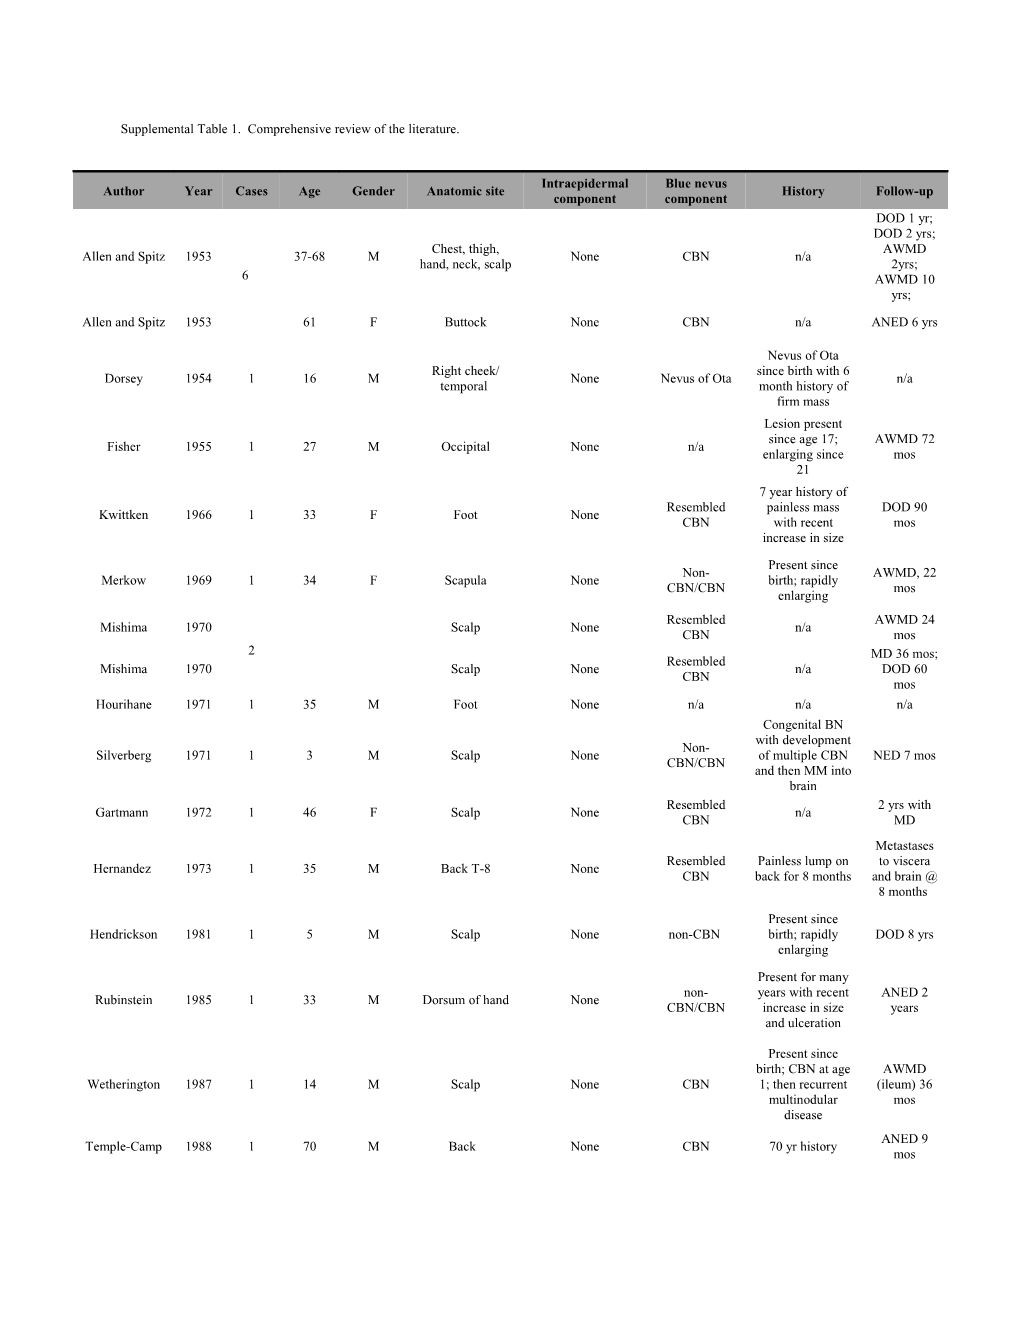 Supplemental Table 1. Comprehensive Review of the Literature